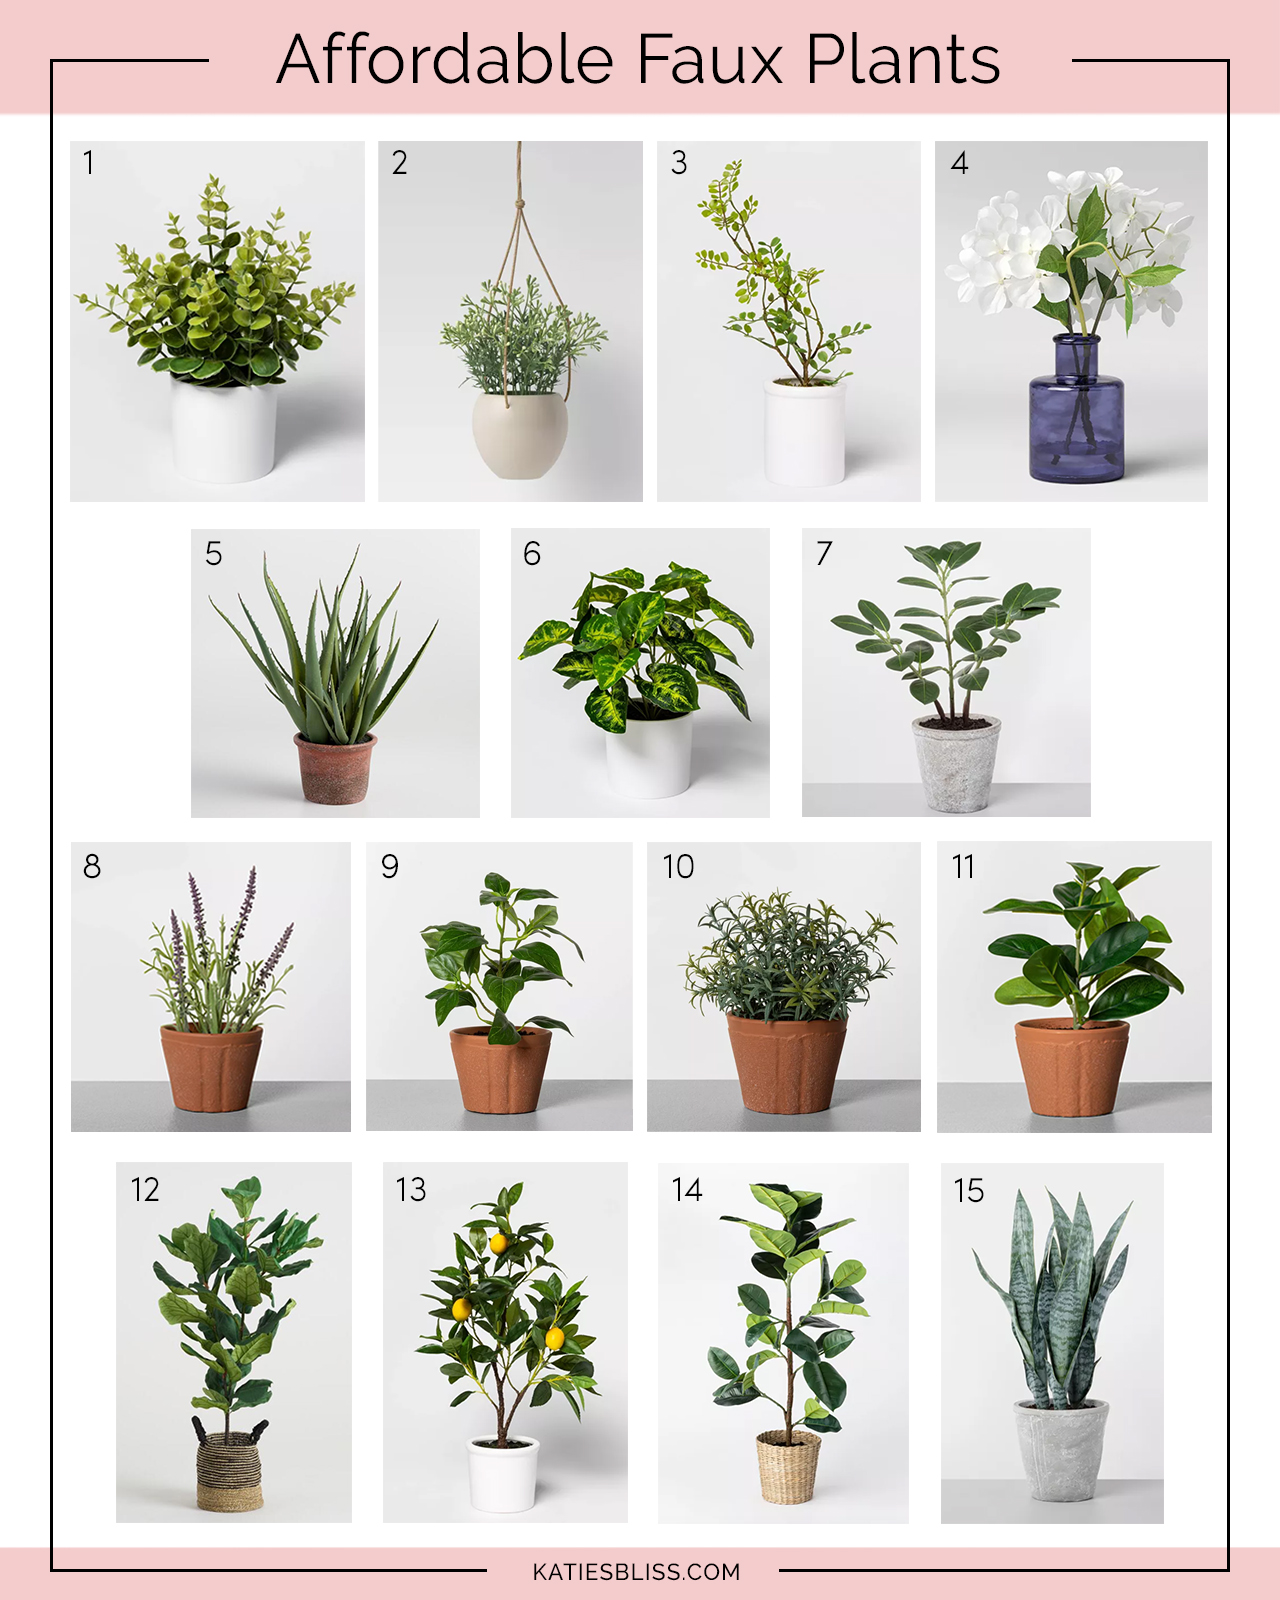 Katies Bliss Affordable Faux Plants